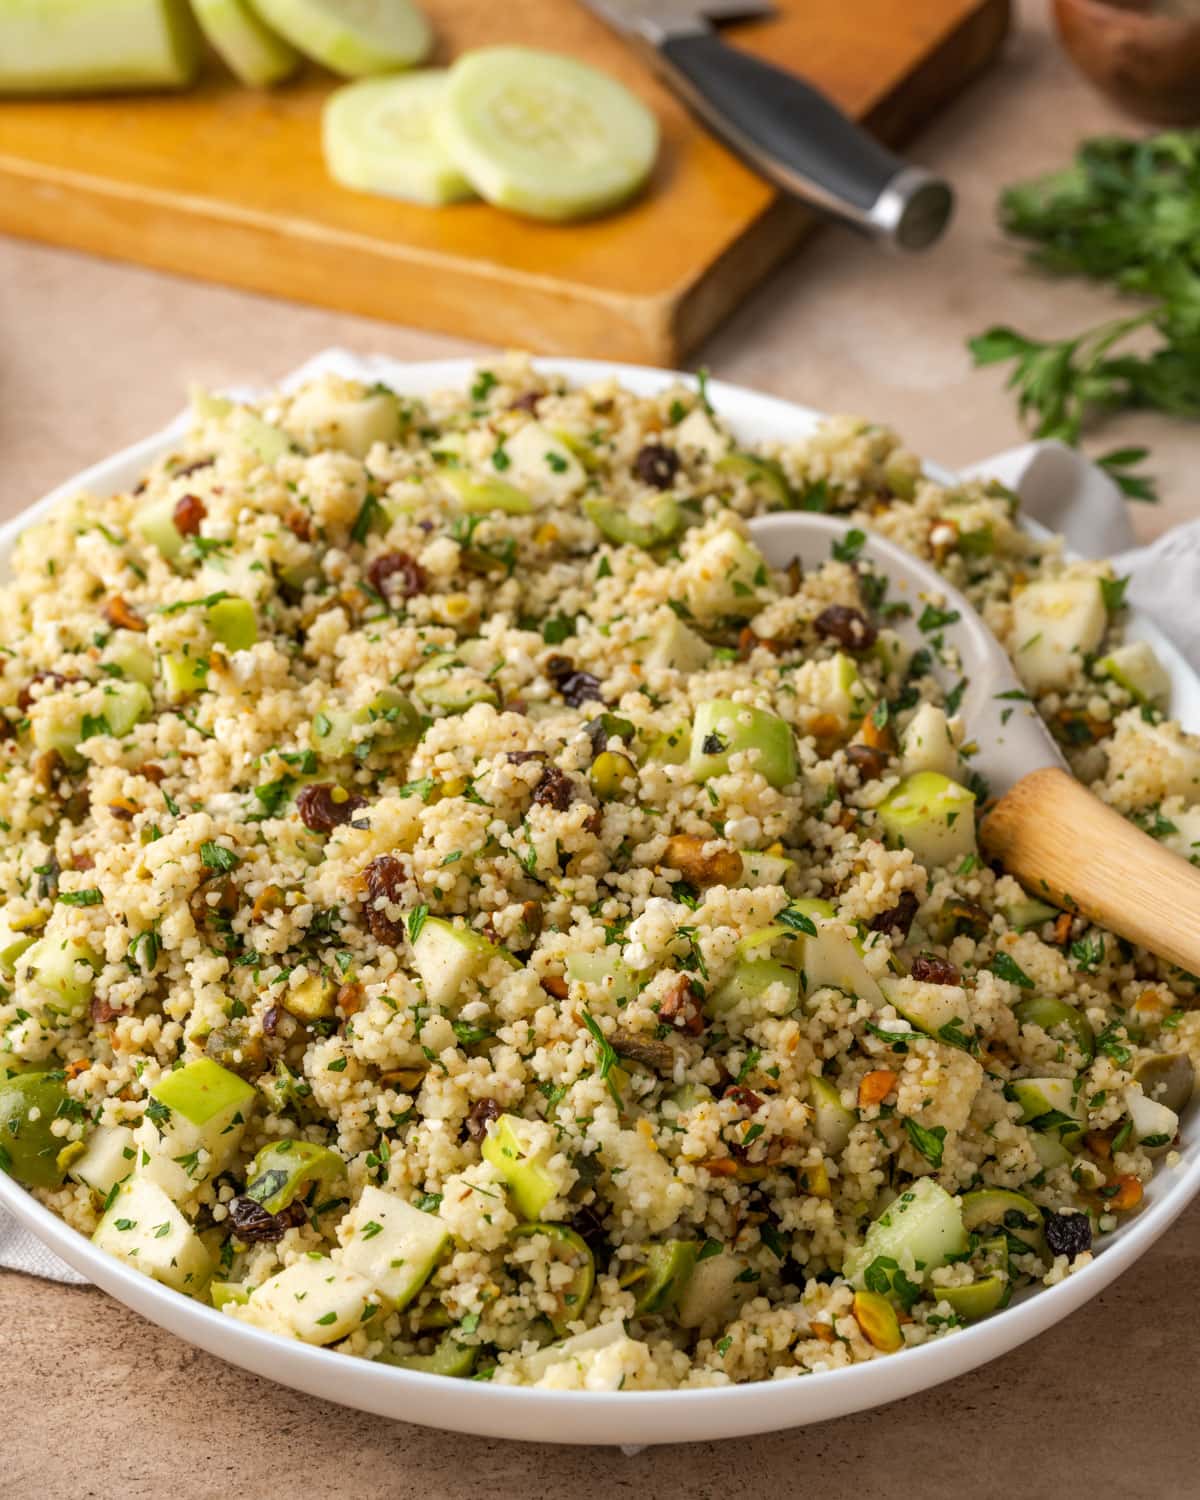 Mediterranean couscous salad in a large white serving dish with a wooden spoon.